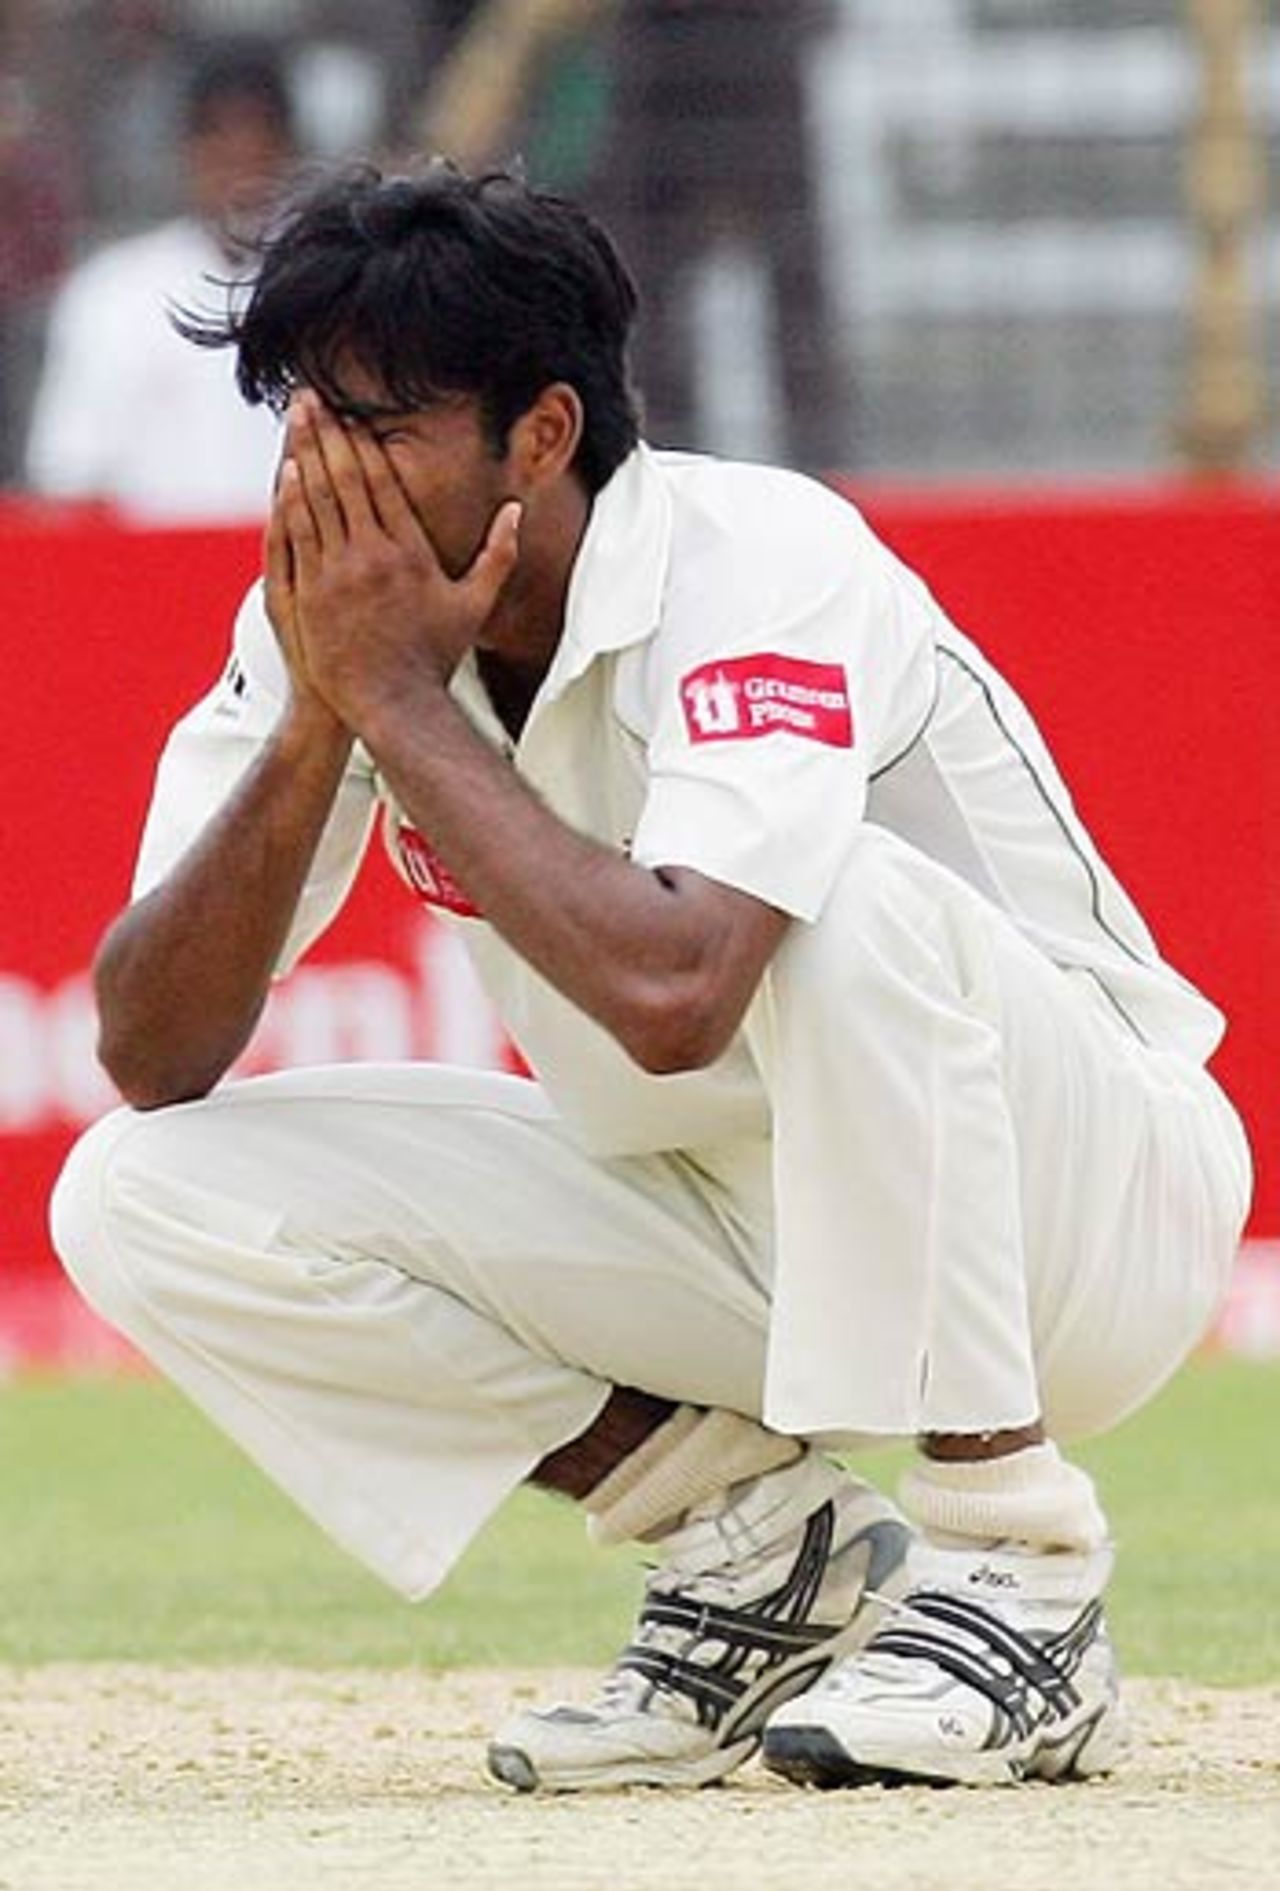 Shahadat Hossain is in anguish after Ricky Ponting was dropped, Bangladesh v Australia, 1st Test, Fatullah, 5th day, April 13, 2006